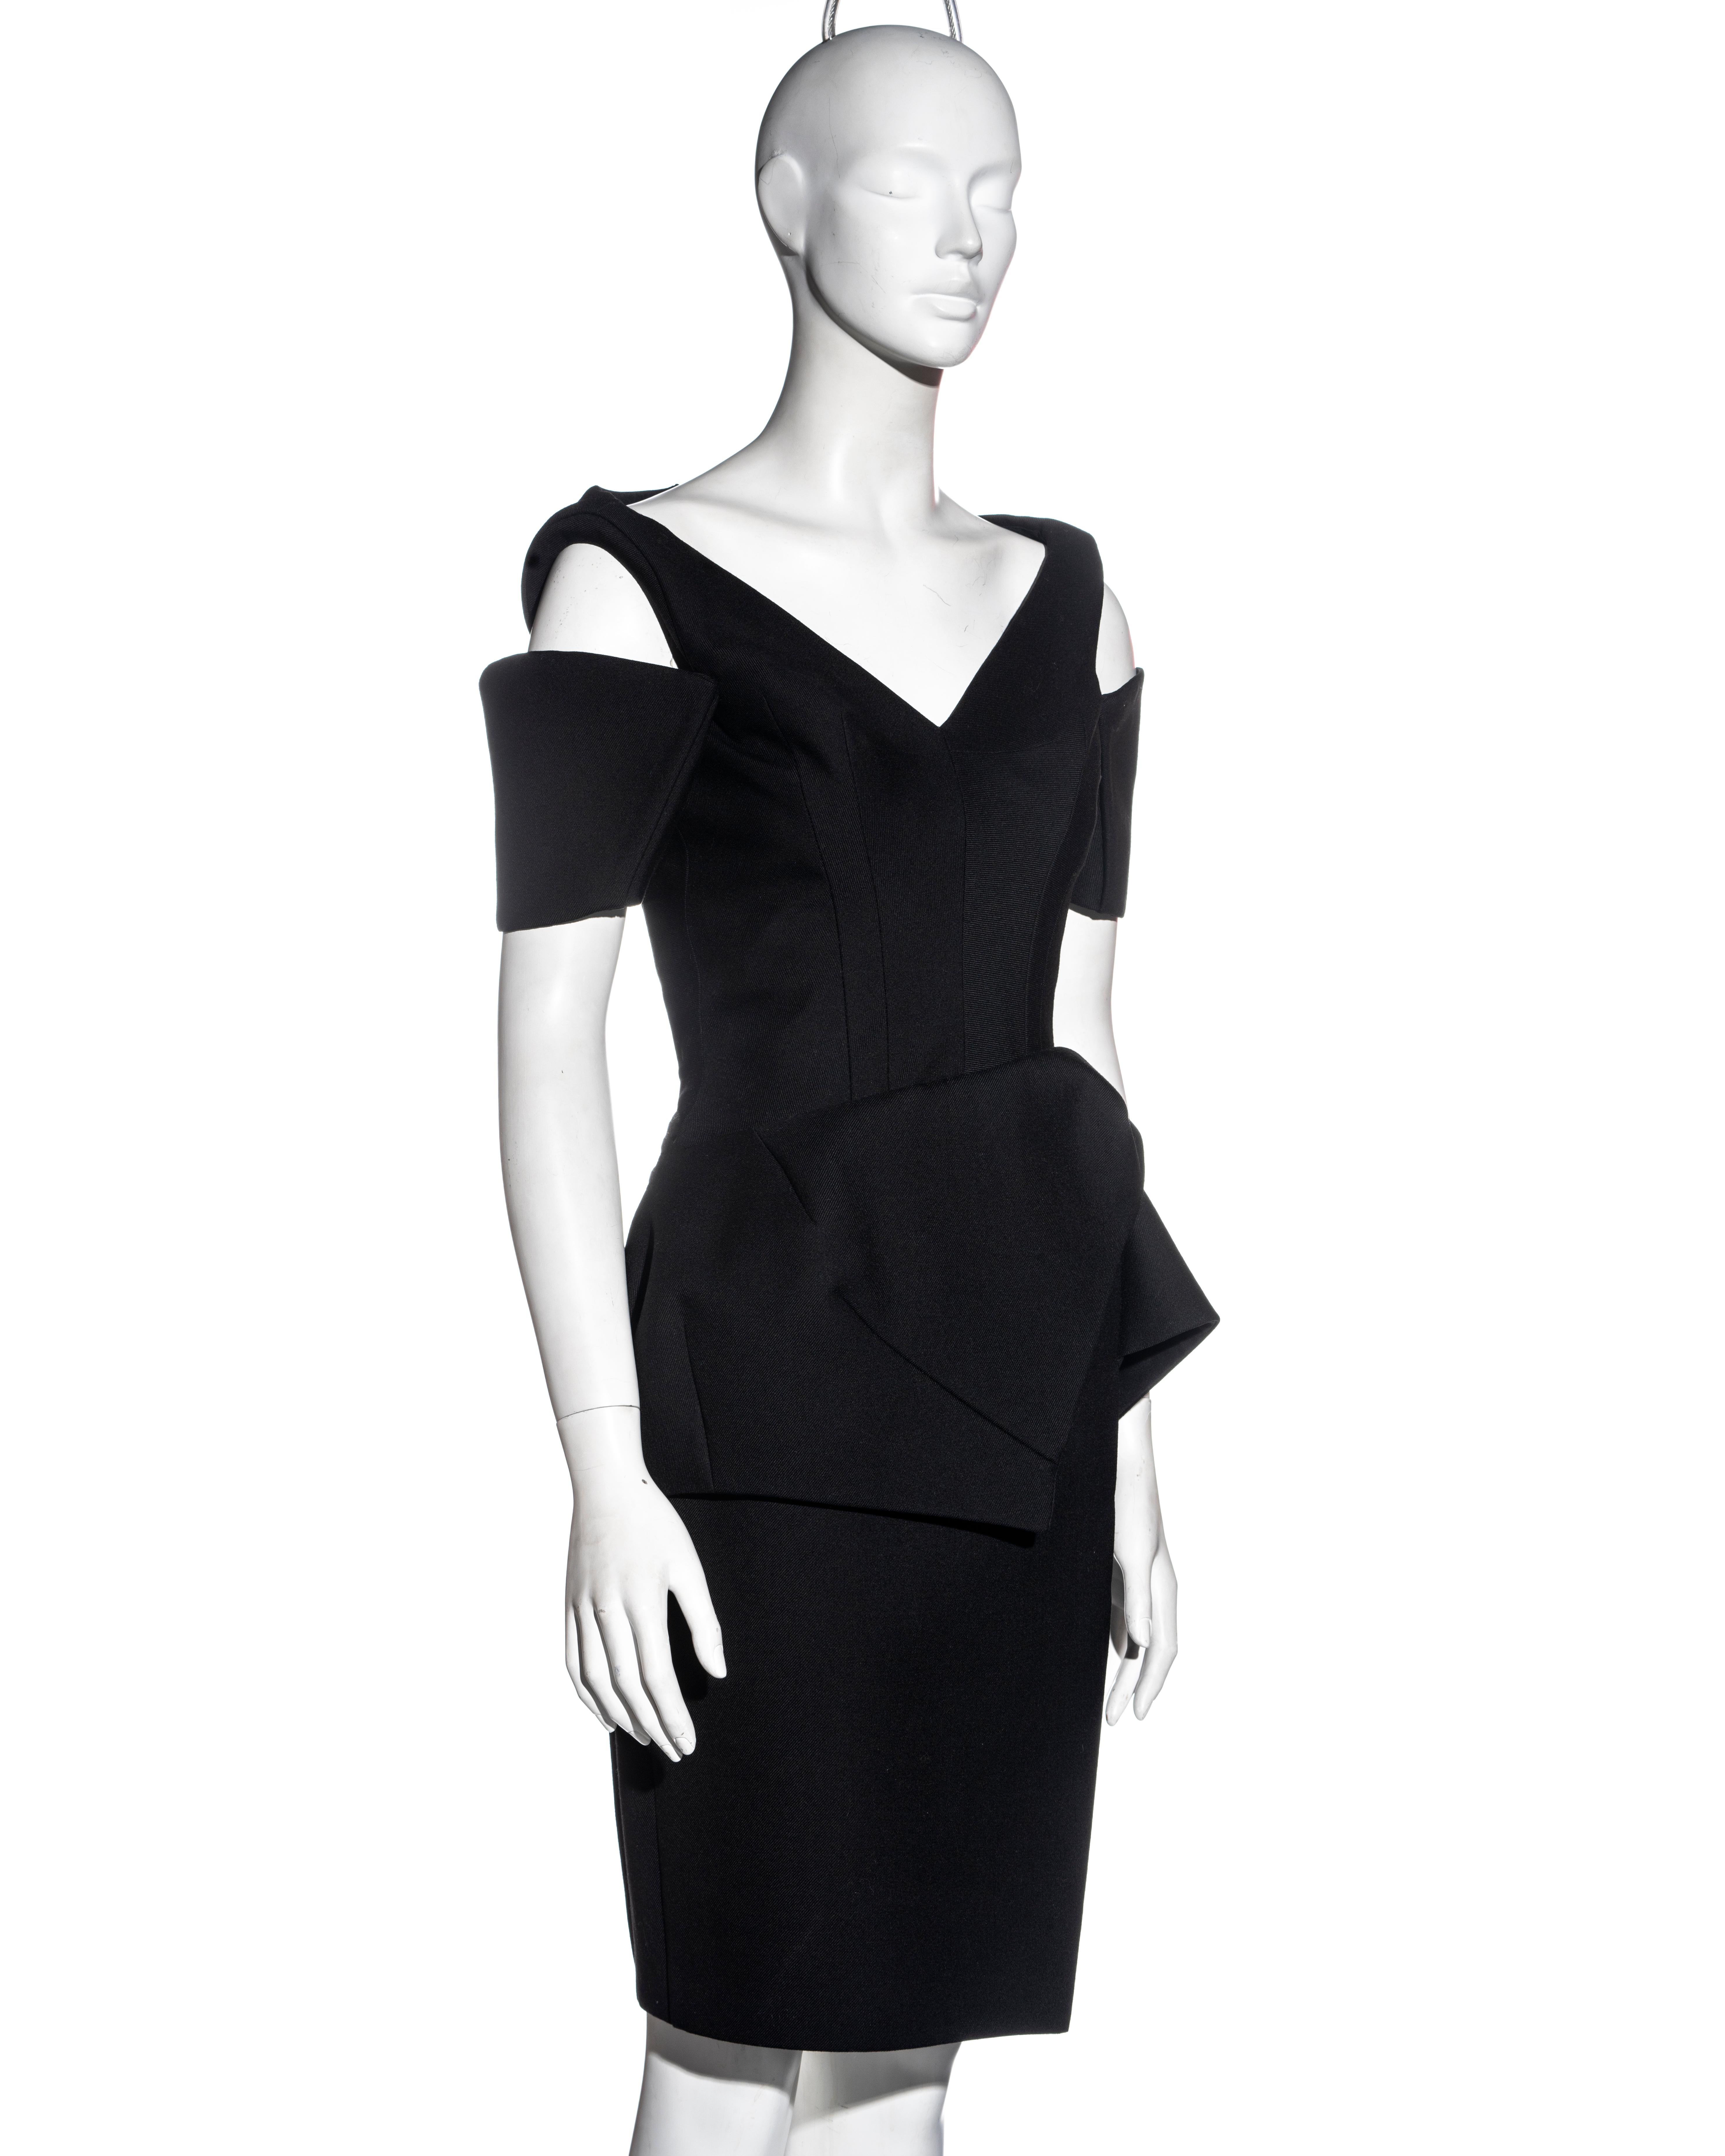 Women's Balenciaga by Nicolas Ghesquière black wool structured cocktail dress, fw 2008 For Sale